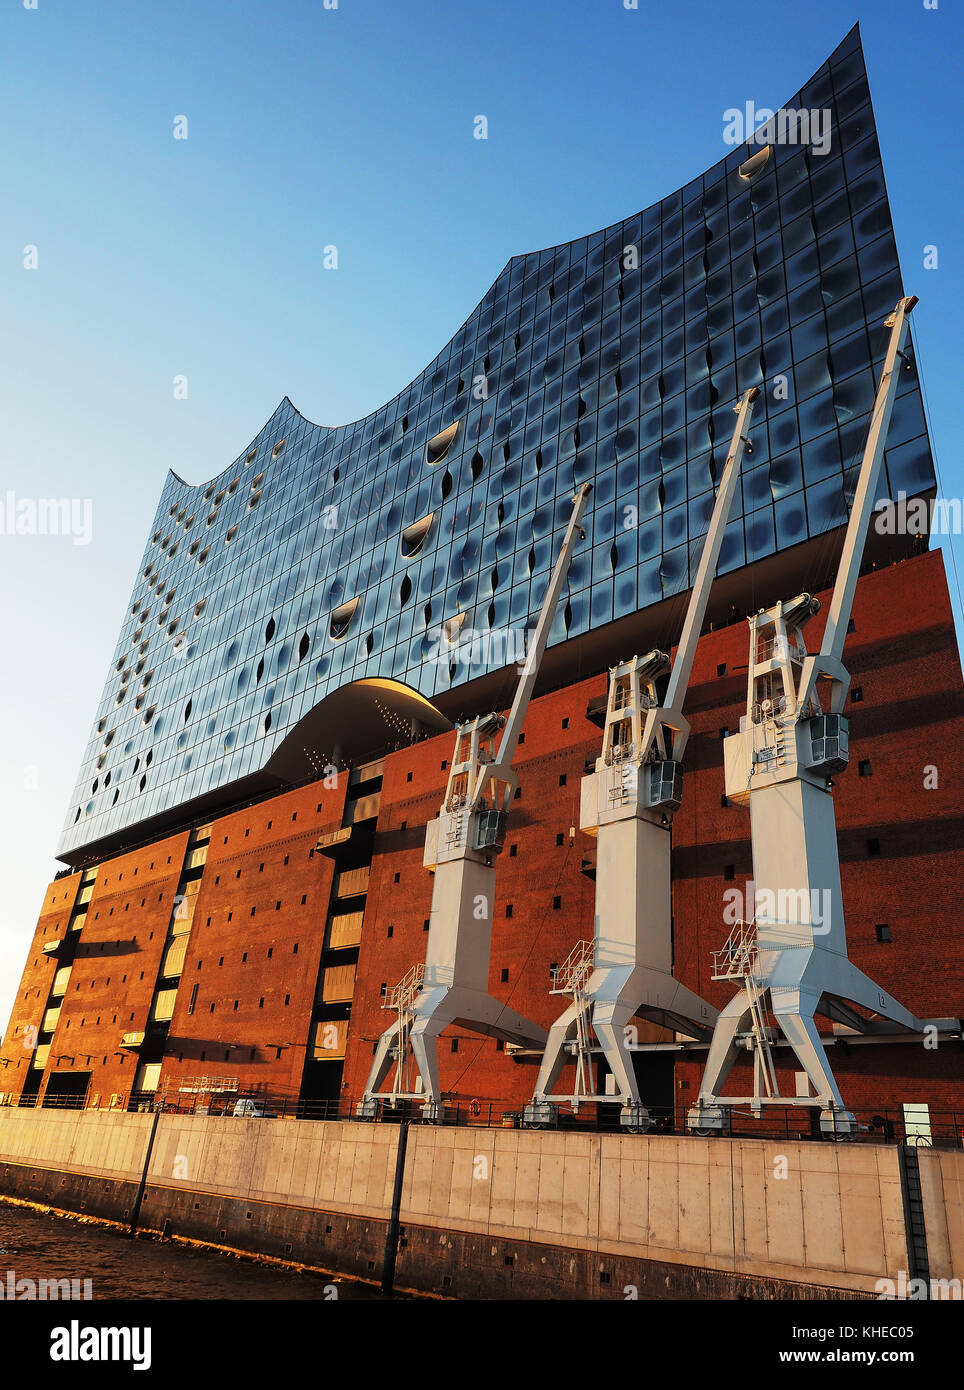 Elbphilharmonie at dawn. The building contains concert halls, a hotel and apartments (architects: Herzog & de Meuron) - Hamburg, Germany Stock Photo